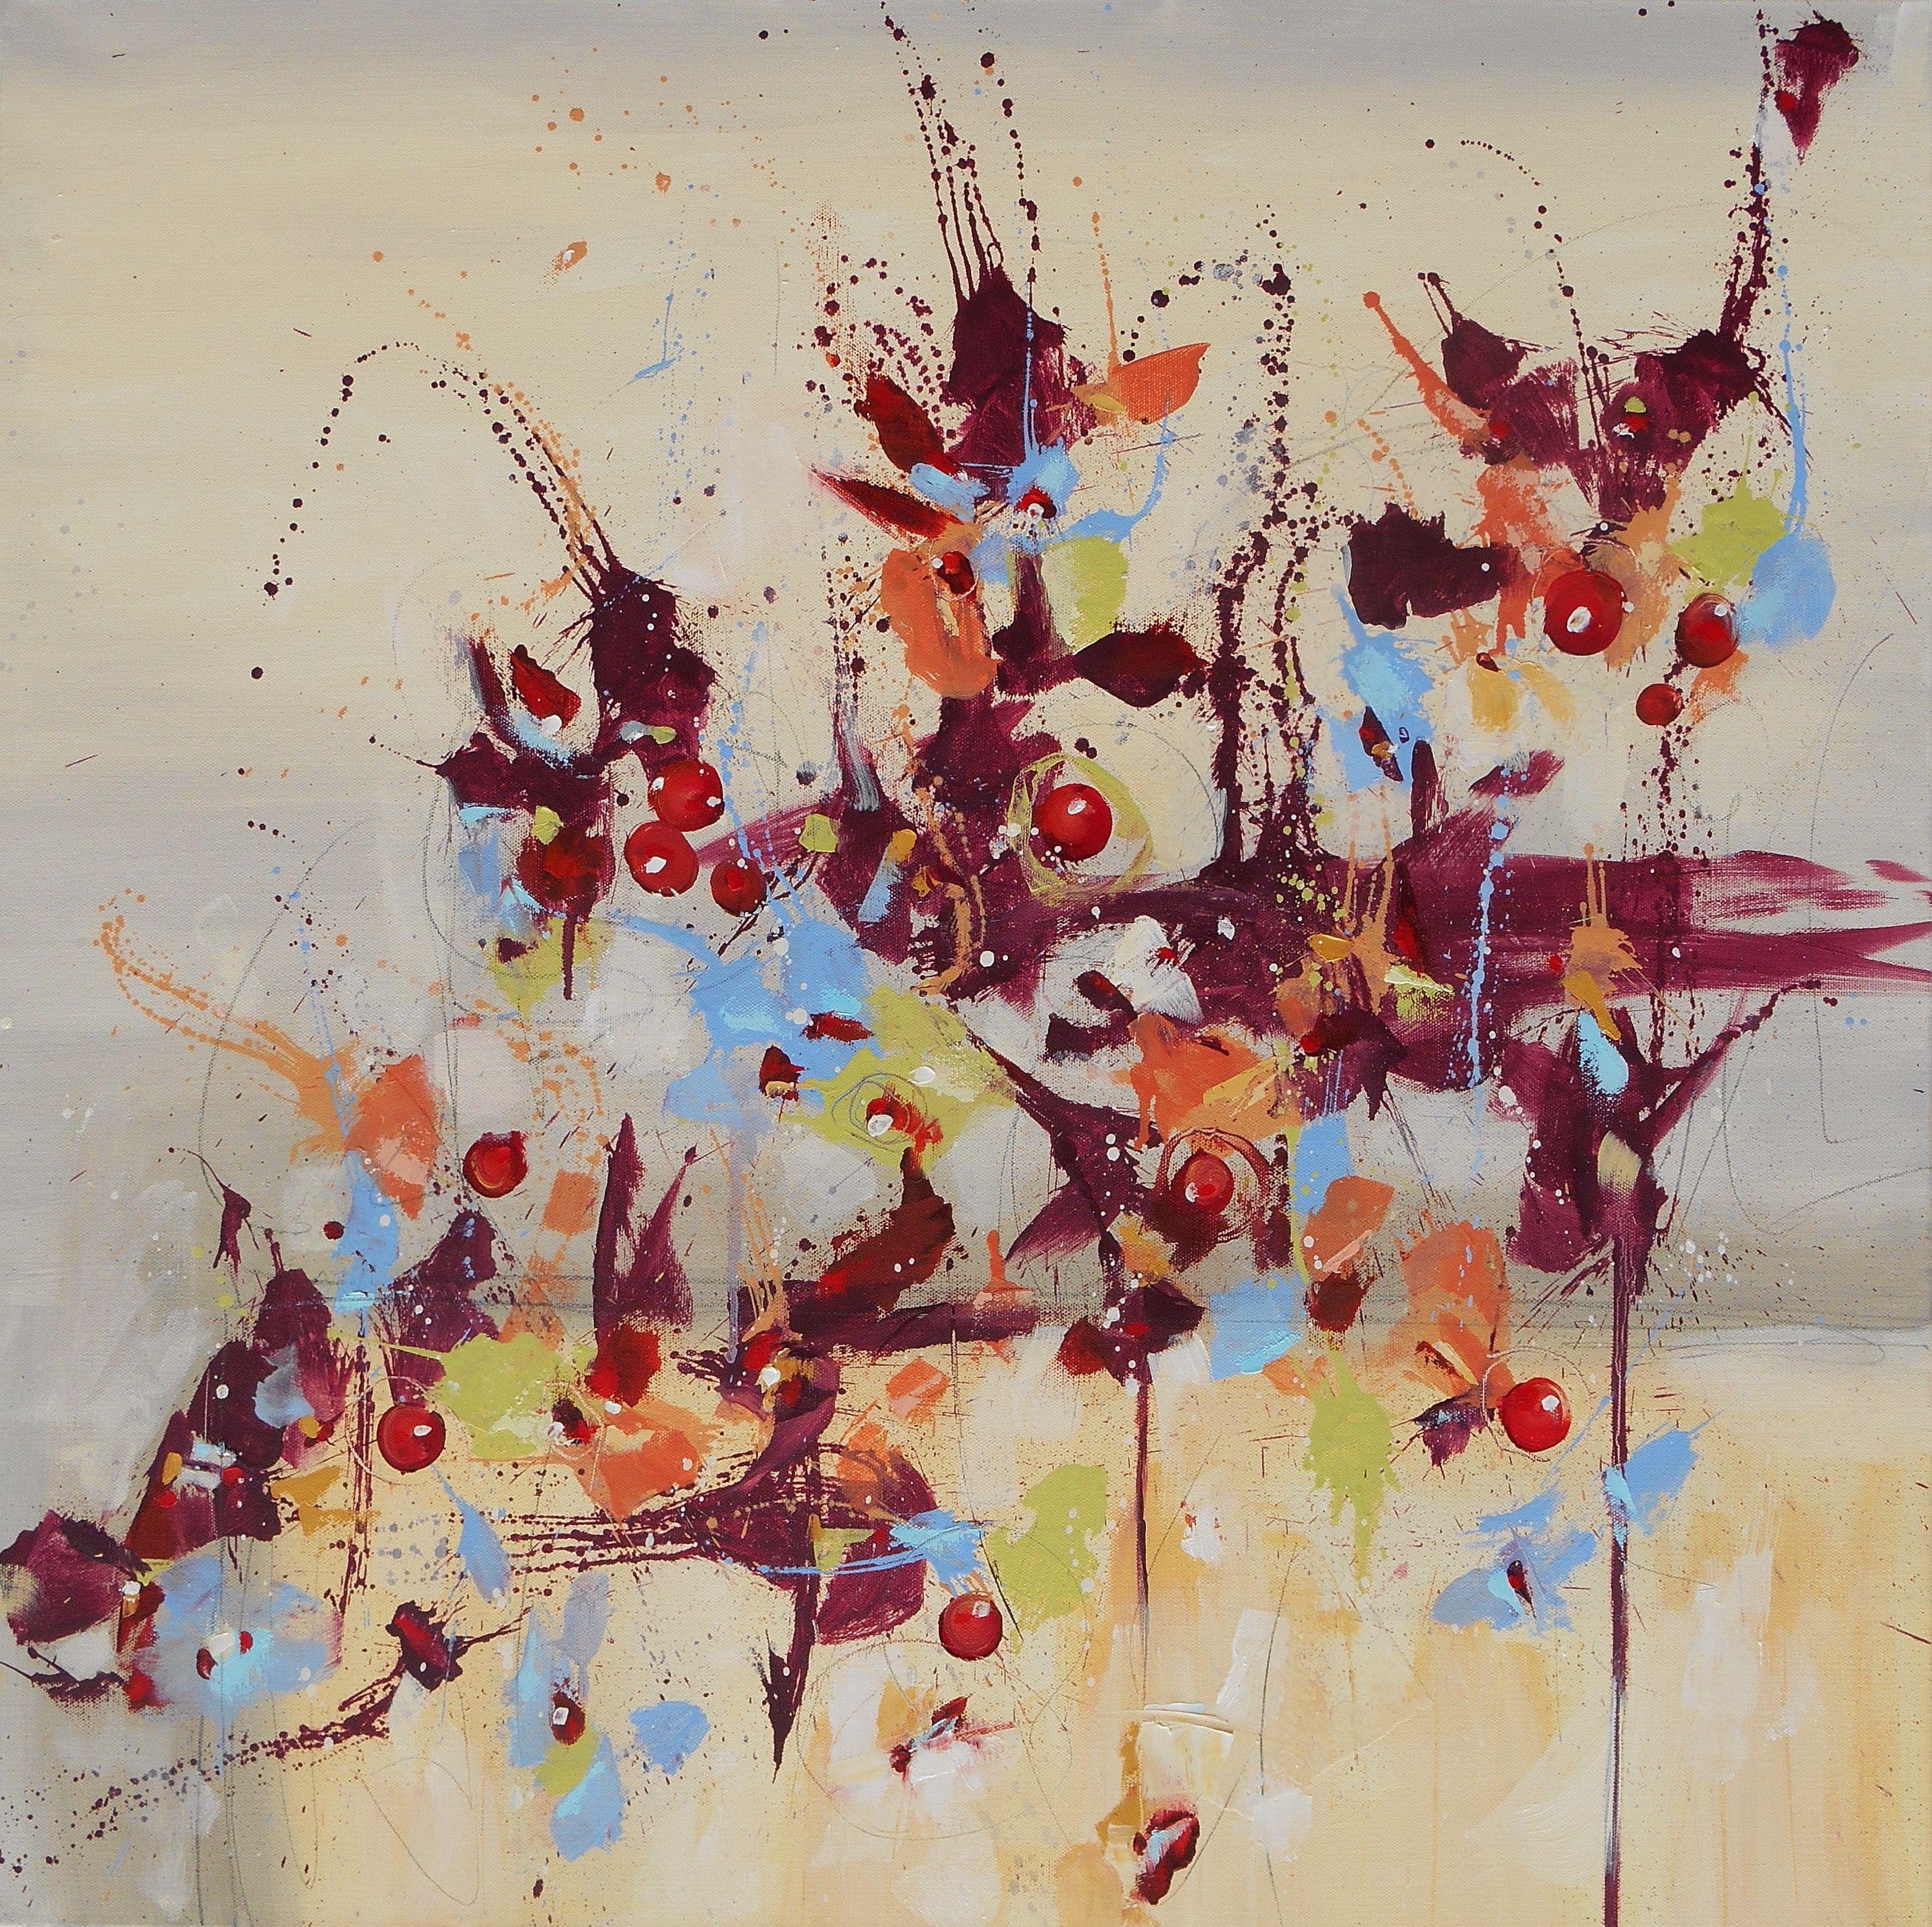 Cynthia  Ligeros Abstract Painting - Fleur de Nostalgie (Flower of Longing) - 30" x 30", Painting, Oil on Canvas